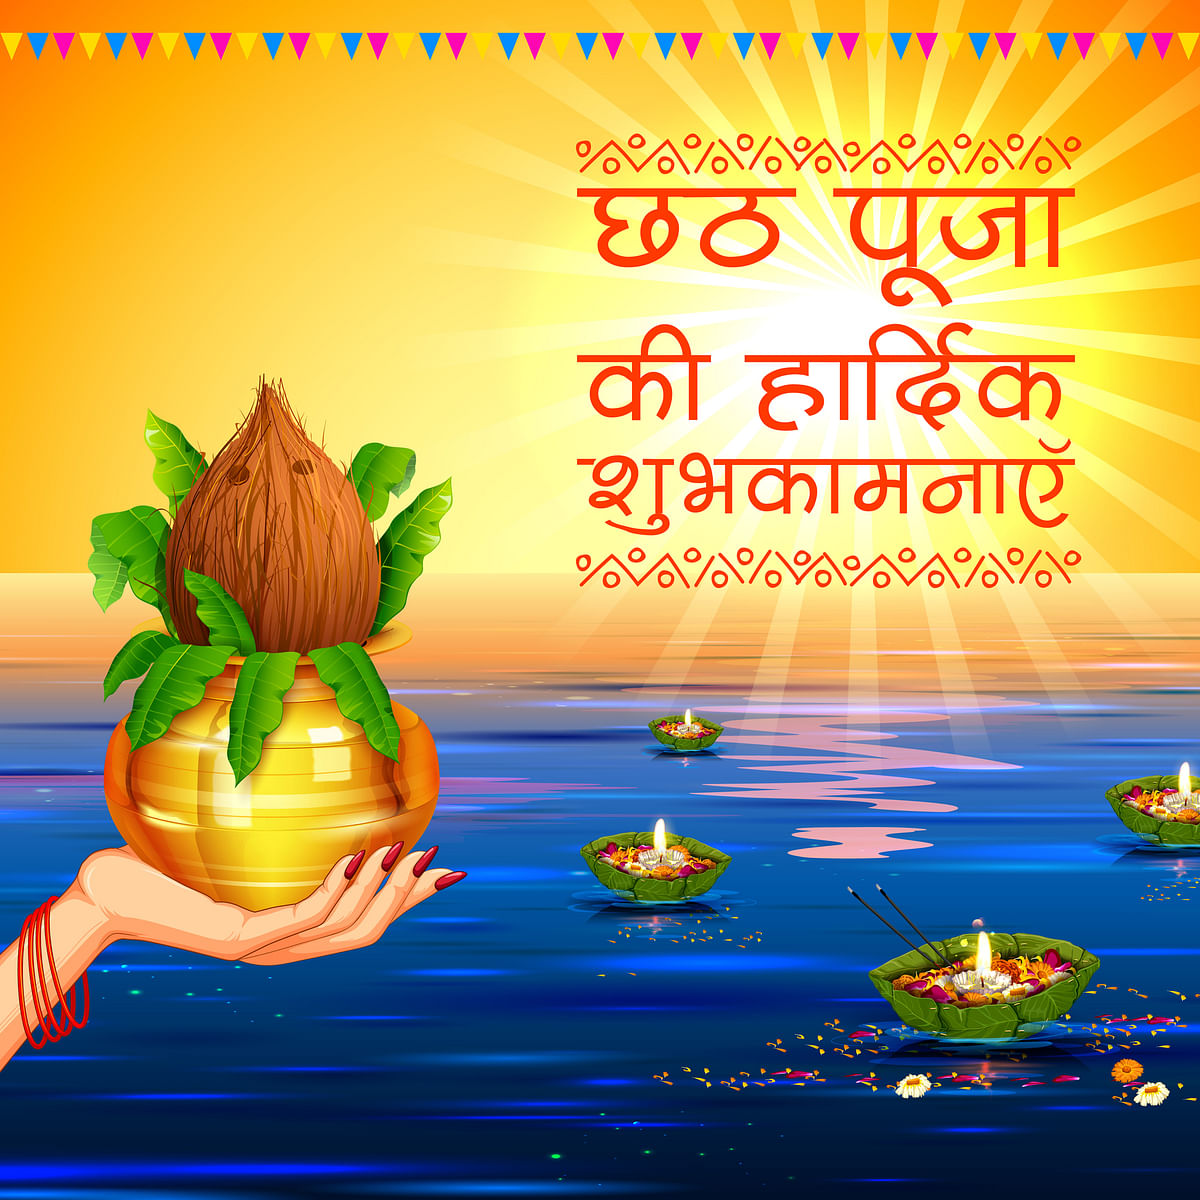 Best Chhath Puja wishes, greetings, images and cards for text messages.